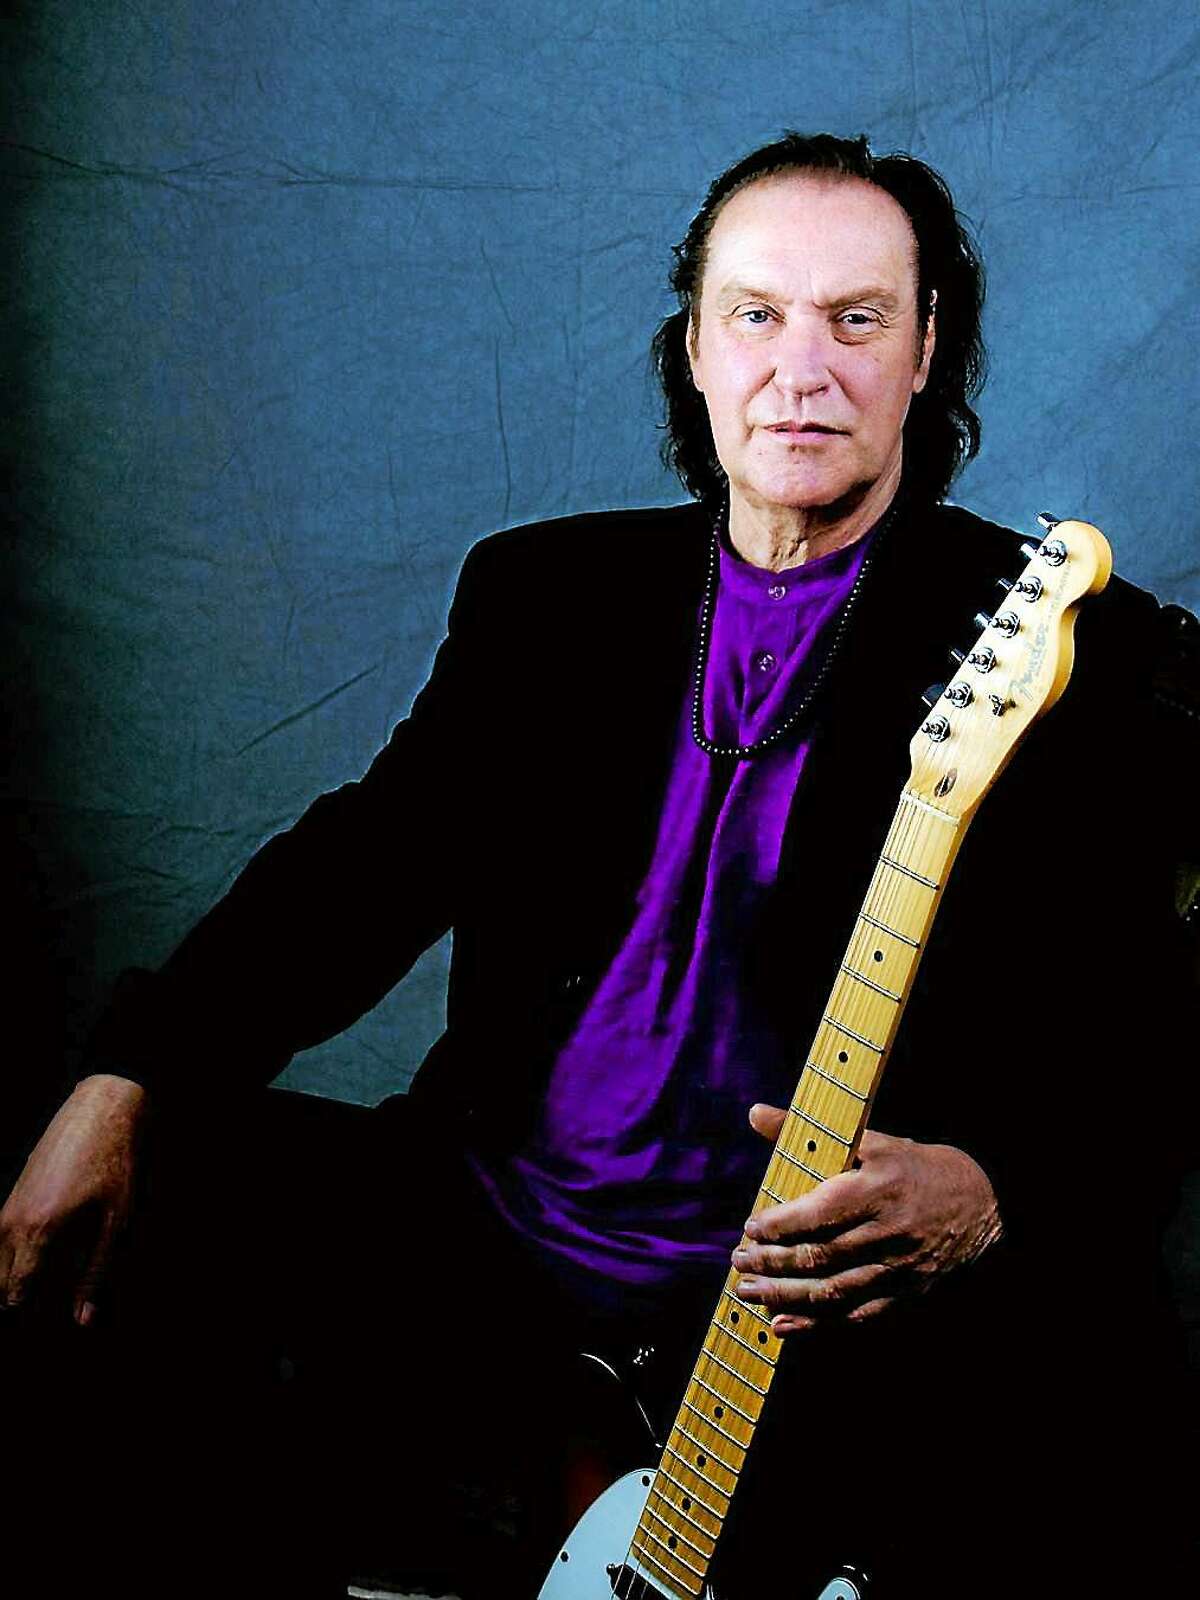 While the Kinks contemplate a reunion tour, fans can see Dave Davies at both Infinity Halls this week.